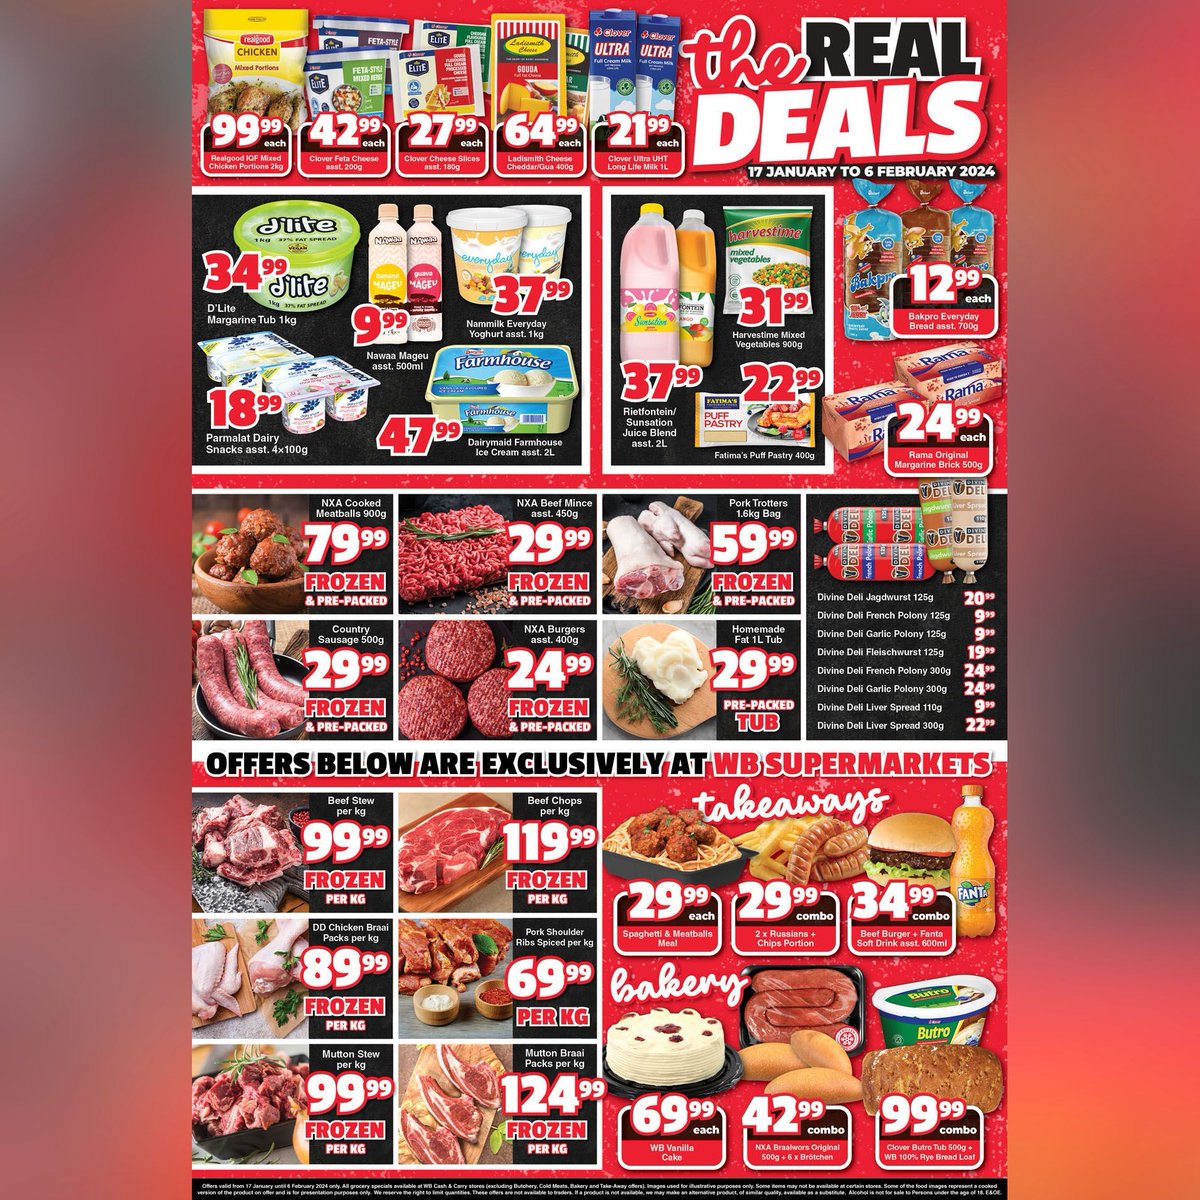 AD | Wave goodbye to Januworry with The Real Deals at WB!  Drive into discounts today at any WB Supermarket or Express Grocery Store Special offers valid from 17 January until 06 February 2024. Visit buff.ly/3lHBtka #WB #WoermannBrock #WBExpress #Specials #TheRealDeals